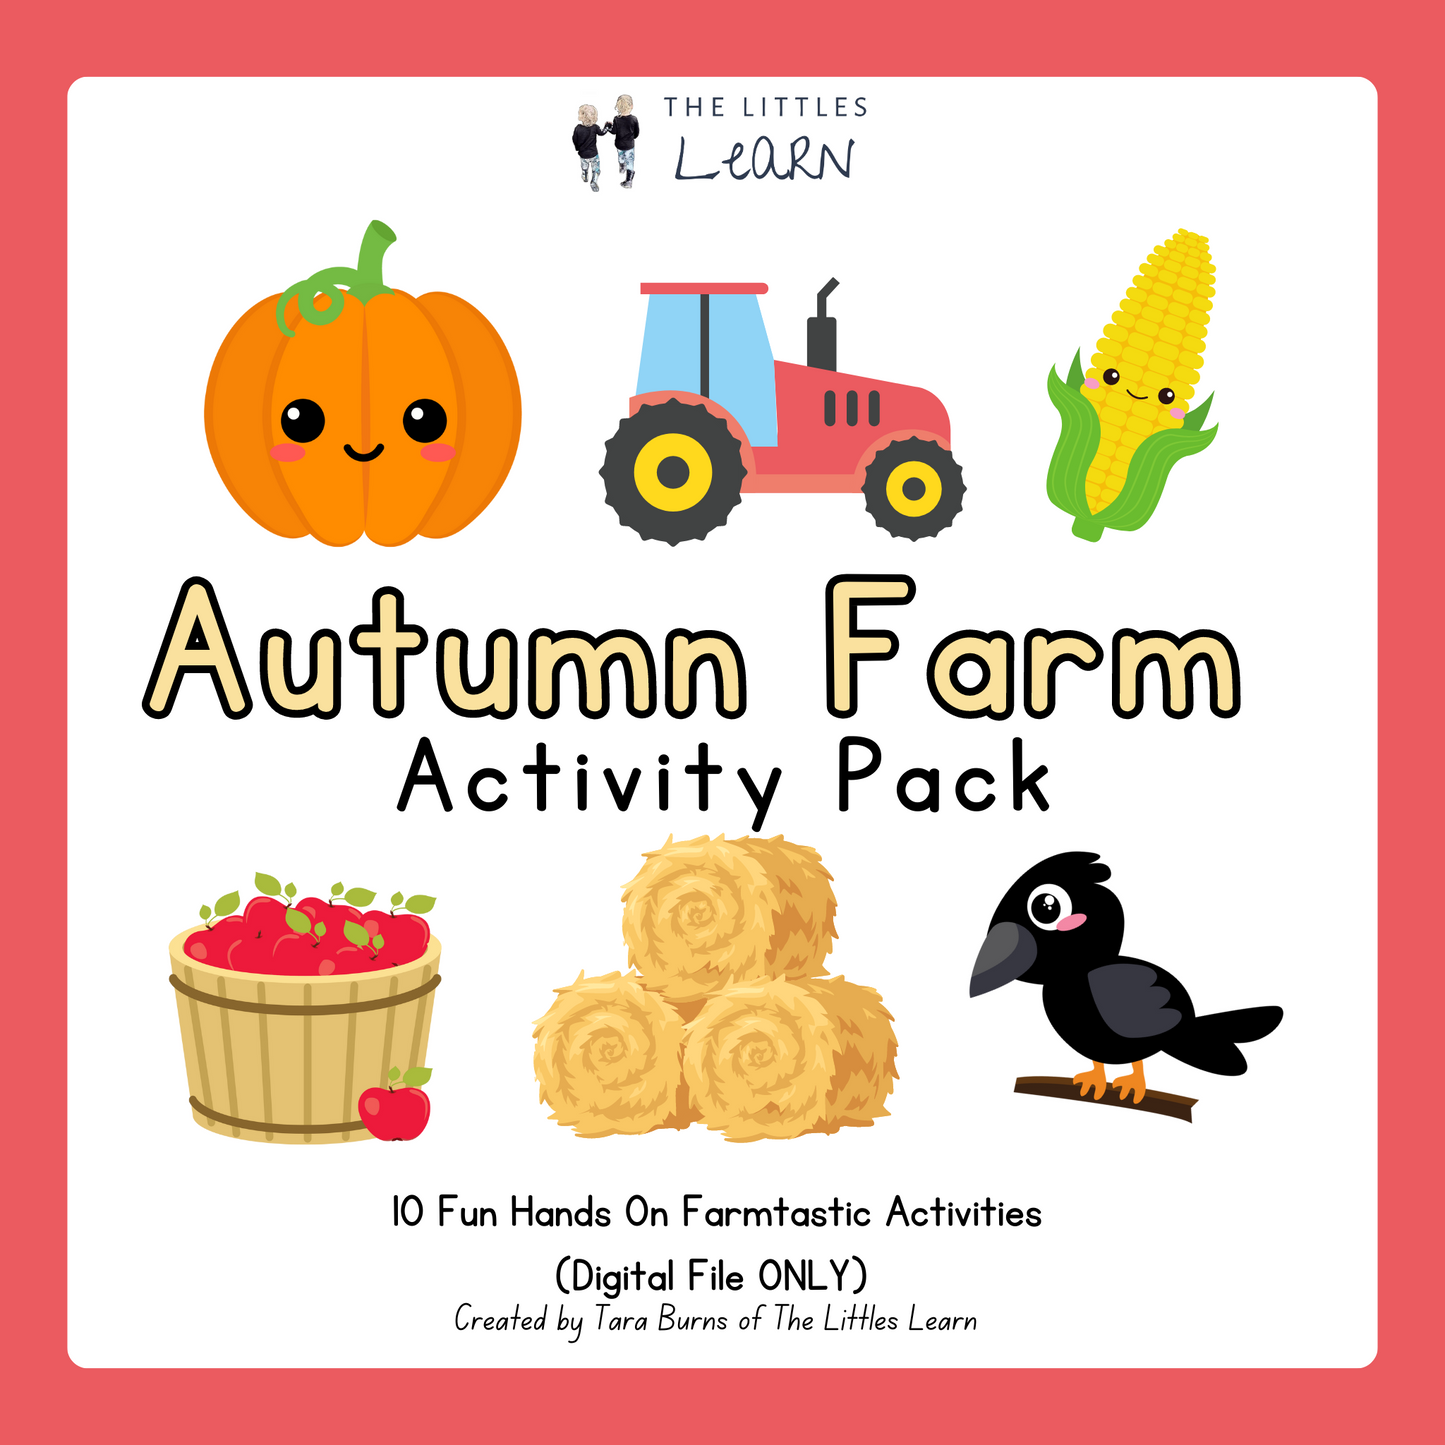 10 fall themed activities for children featuring brightly coloured pictures of farm scenes, a pumpkin patch, corn field, apple tree and vegetables.